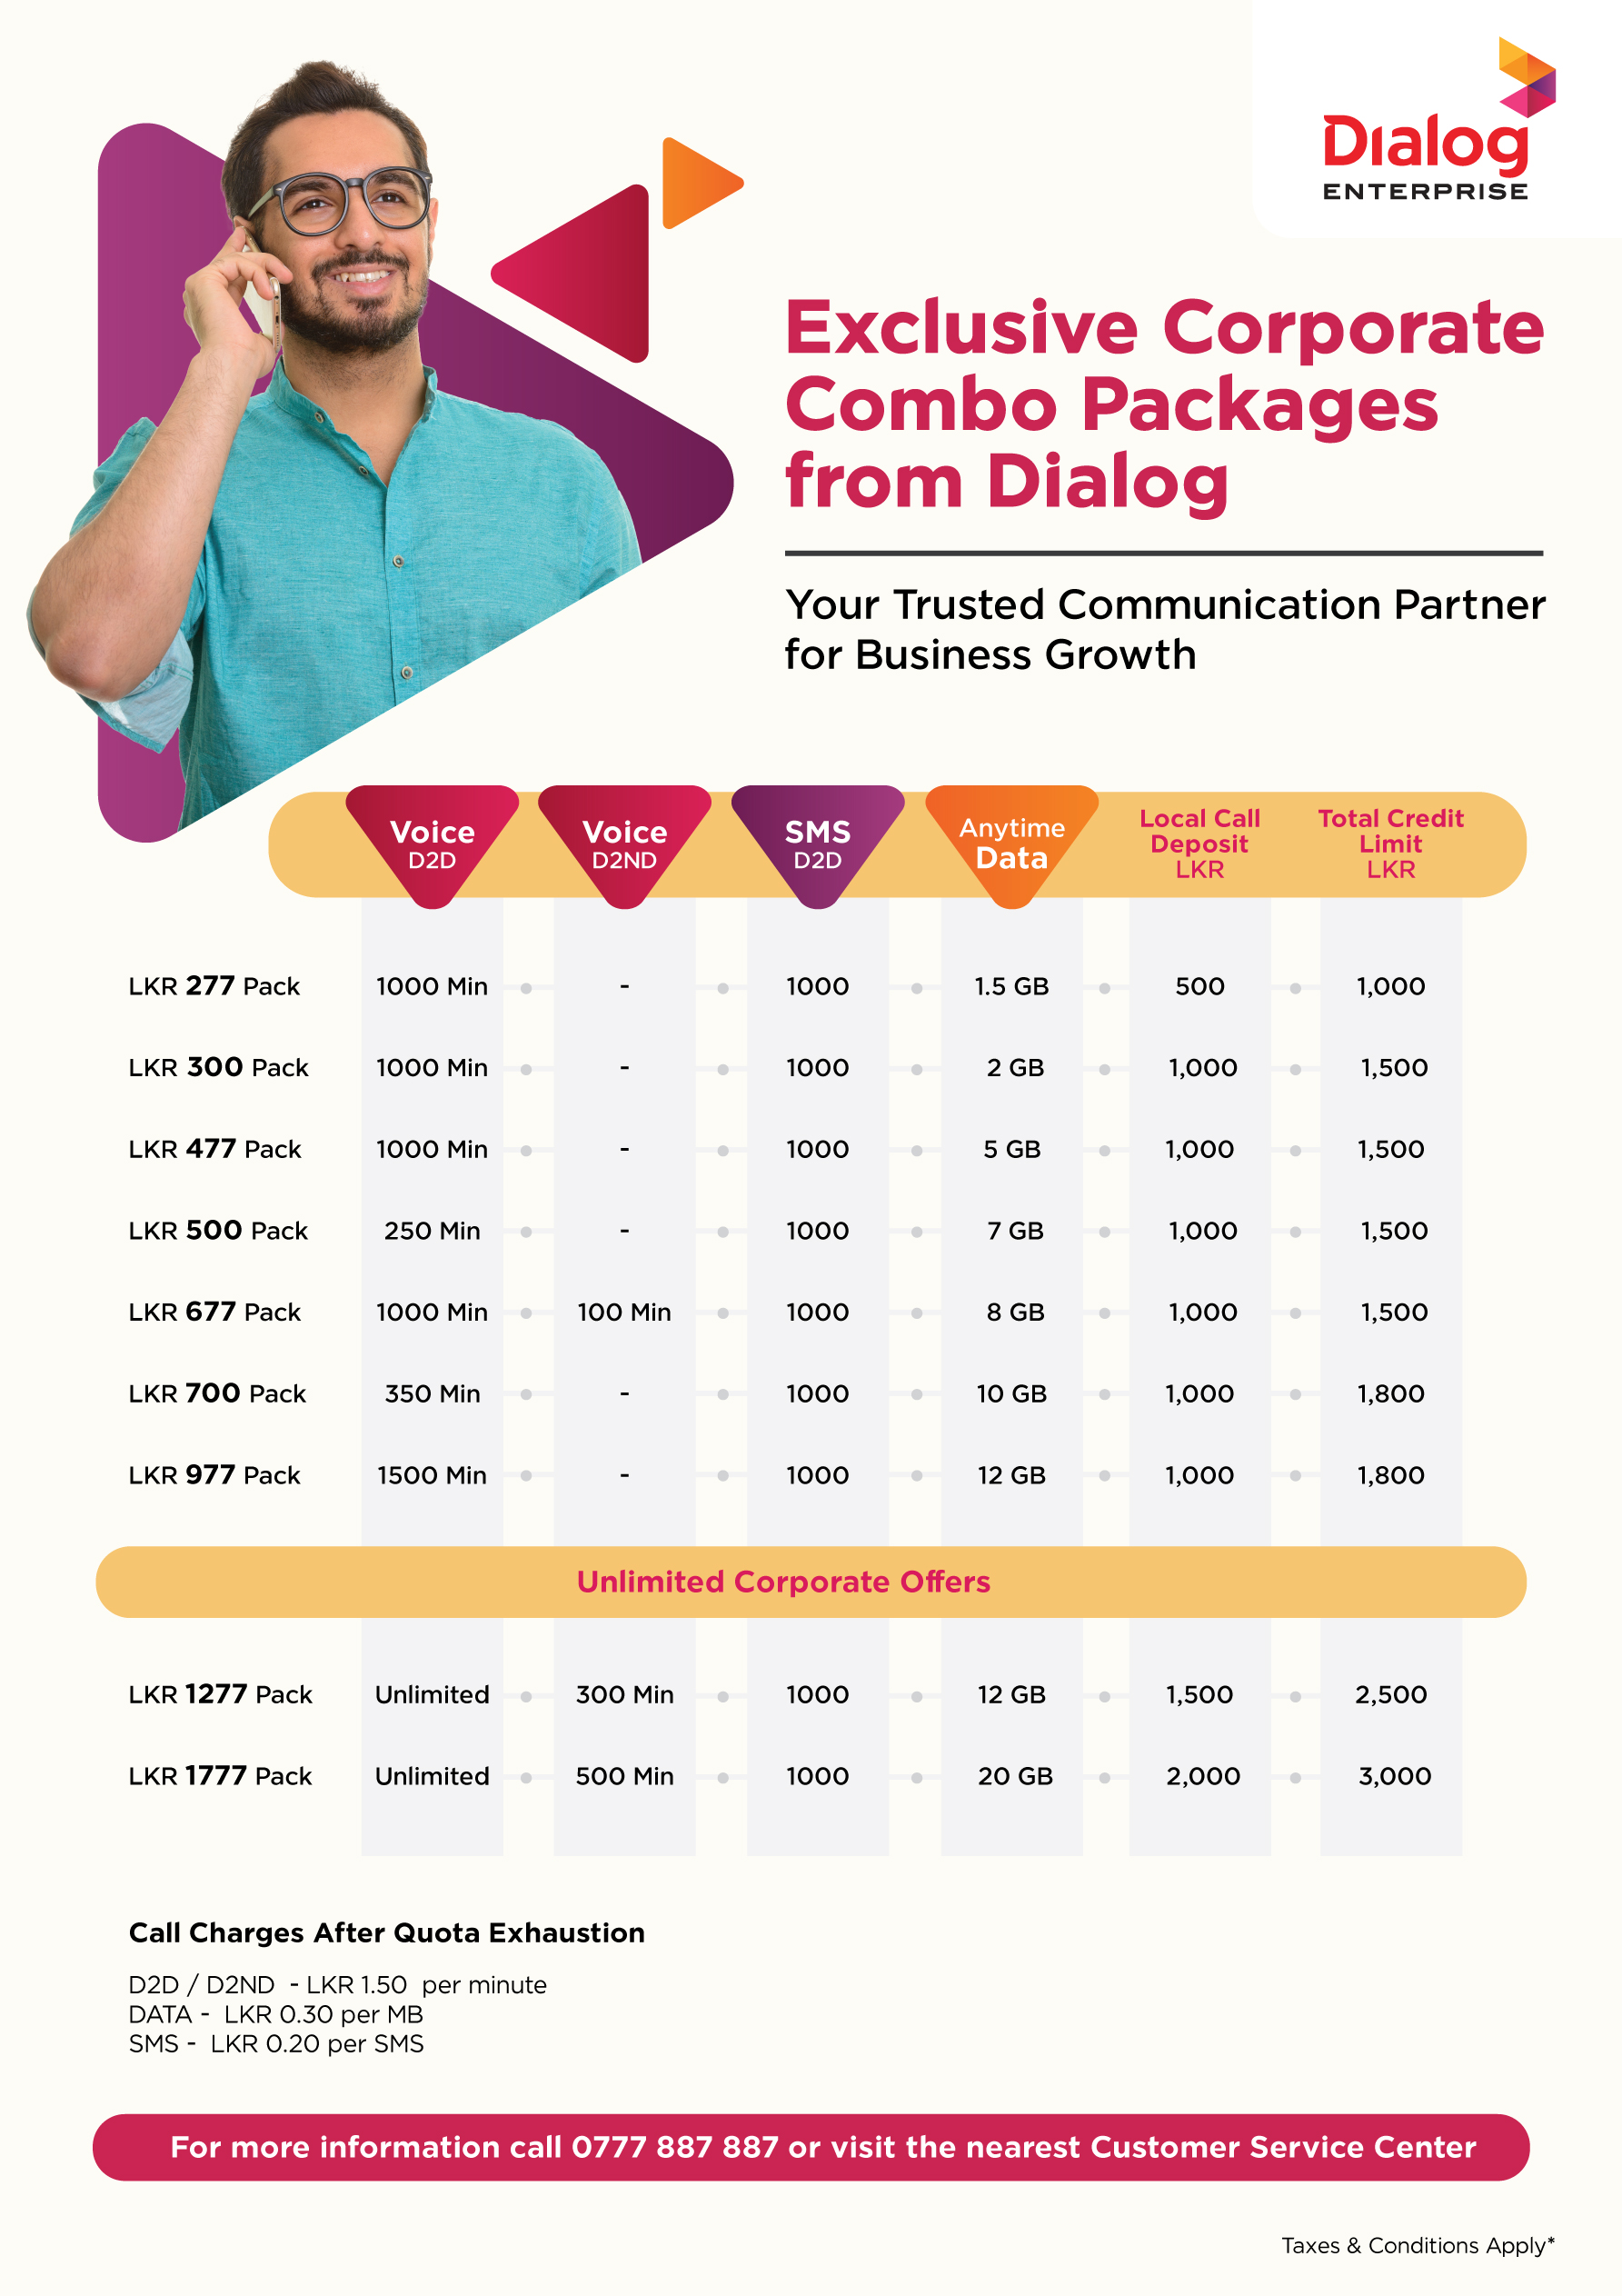 Exclusive Corporate Combo Packages from Dialog Enterprise